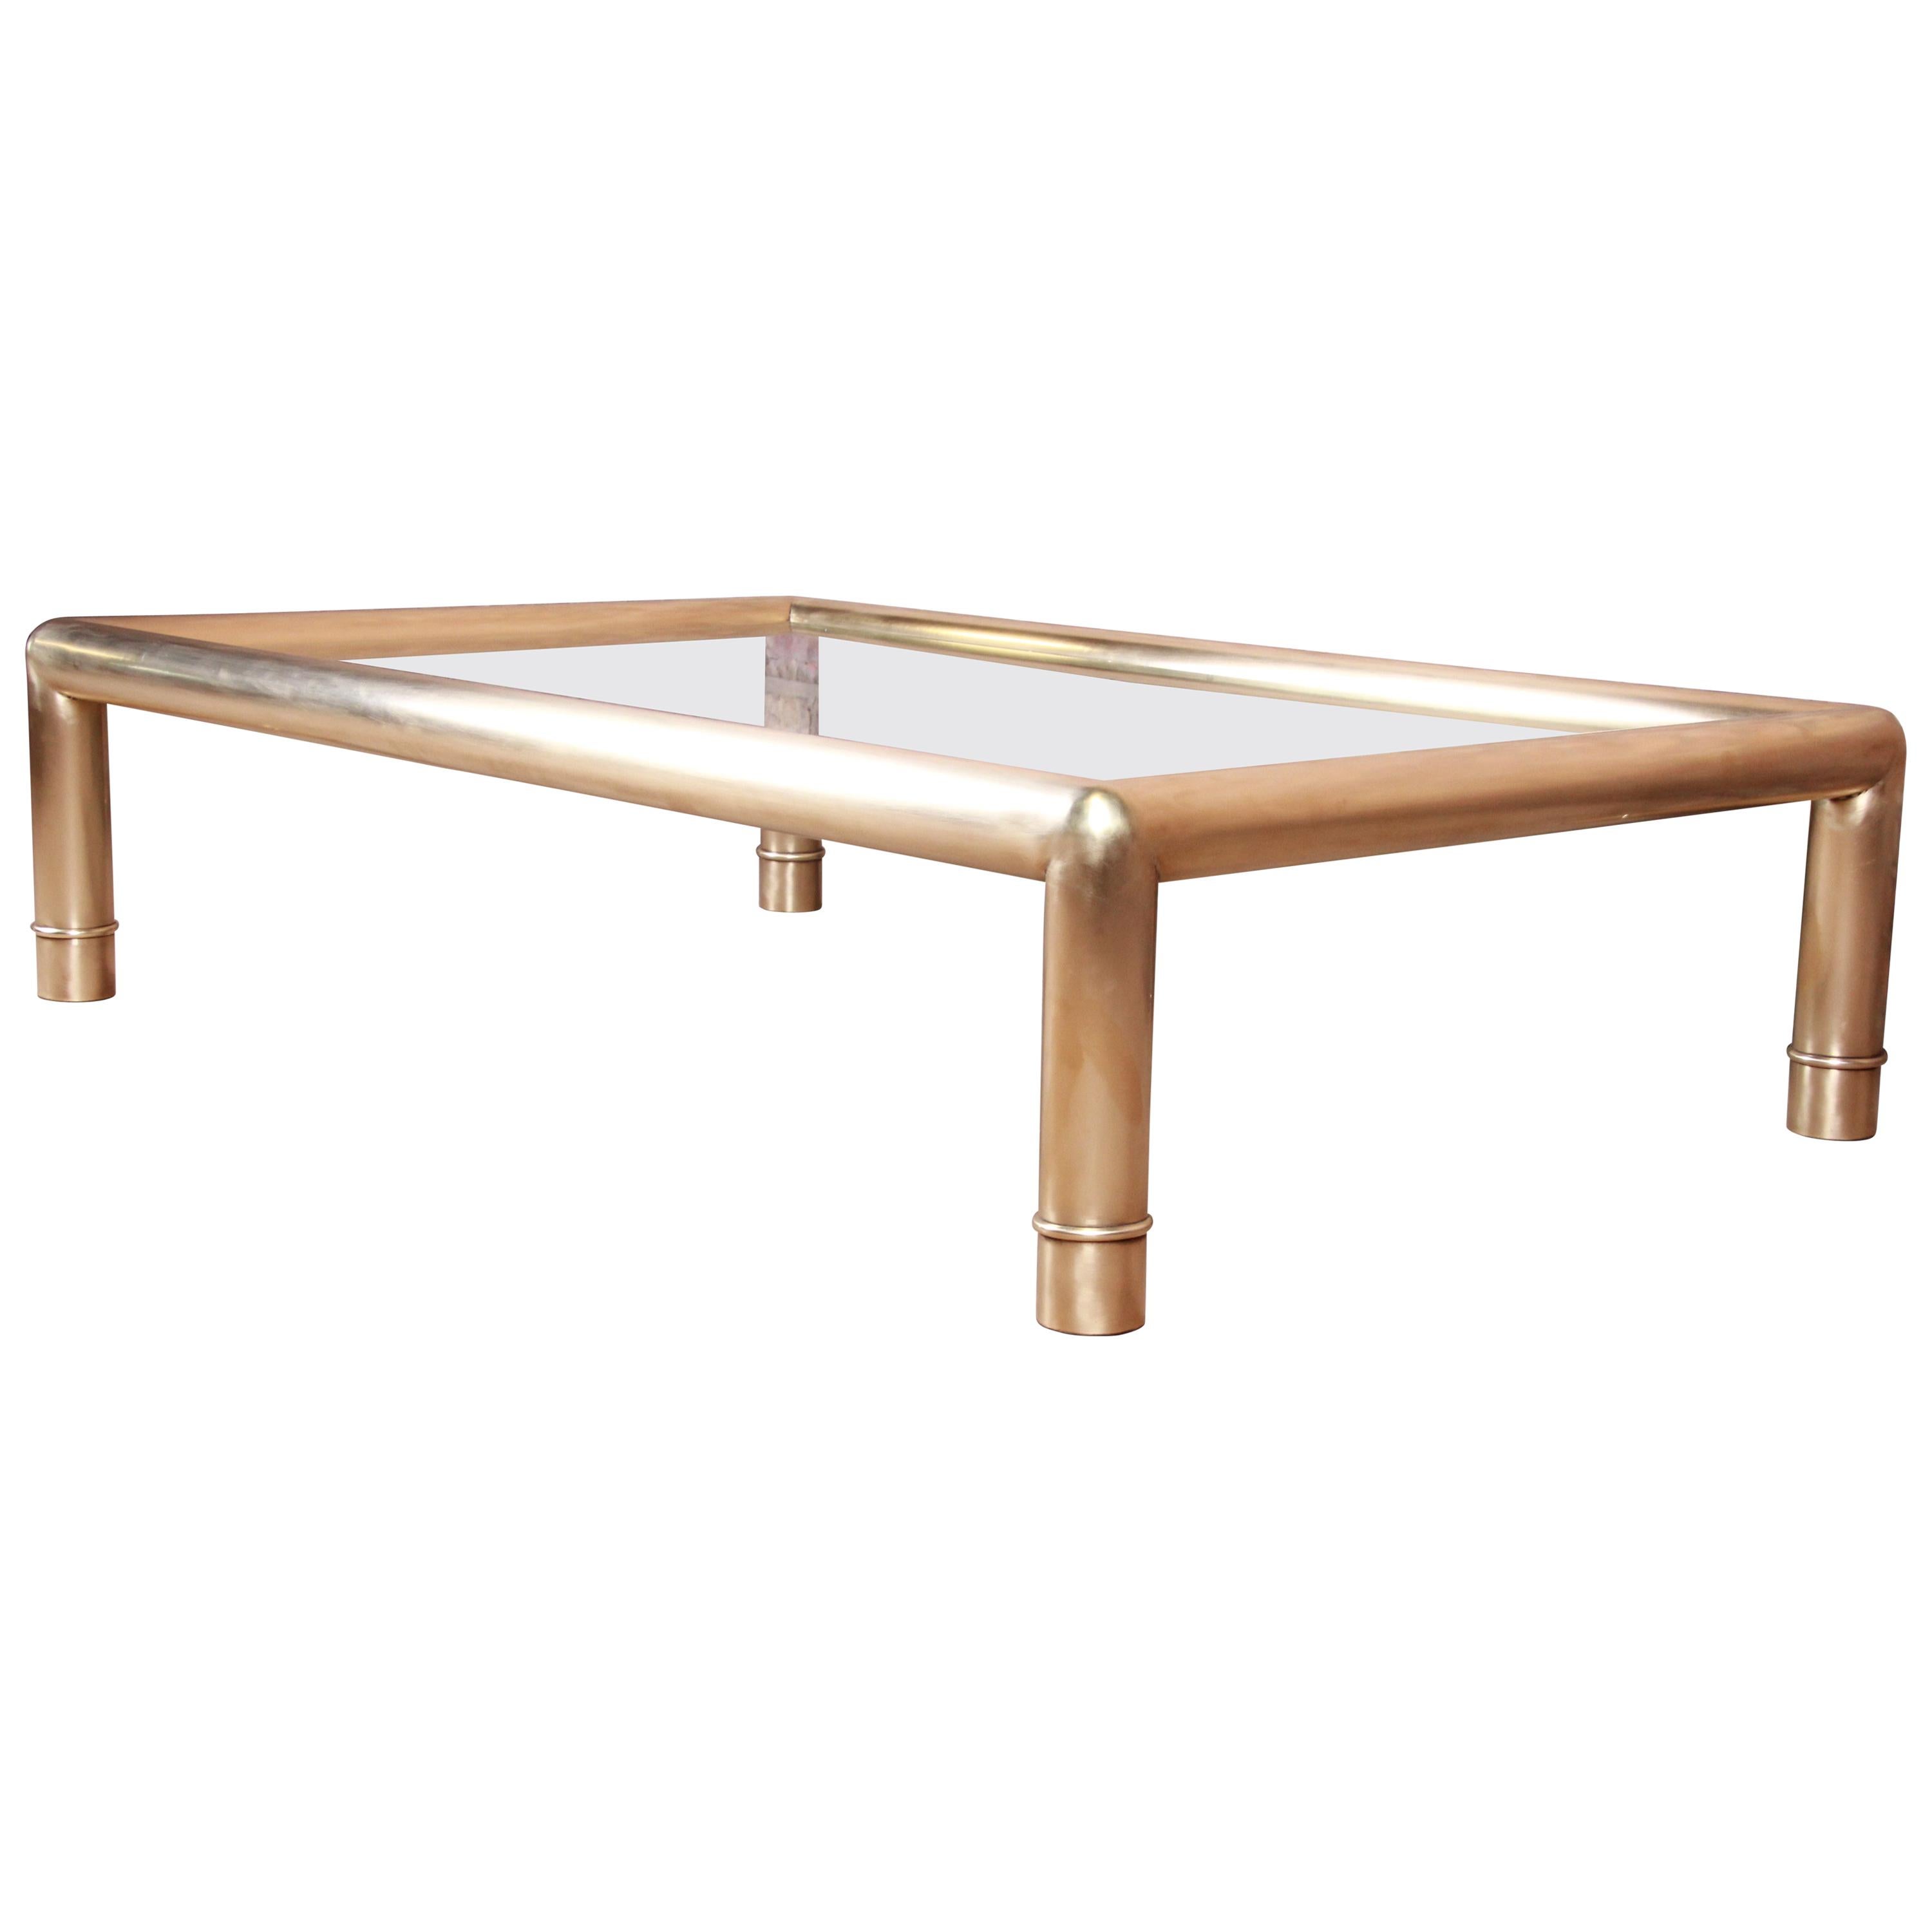 Mastercraft Monumental Hollywood Regency Brass and Glass Cocktail Table